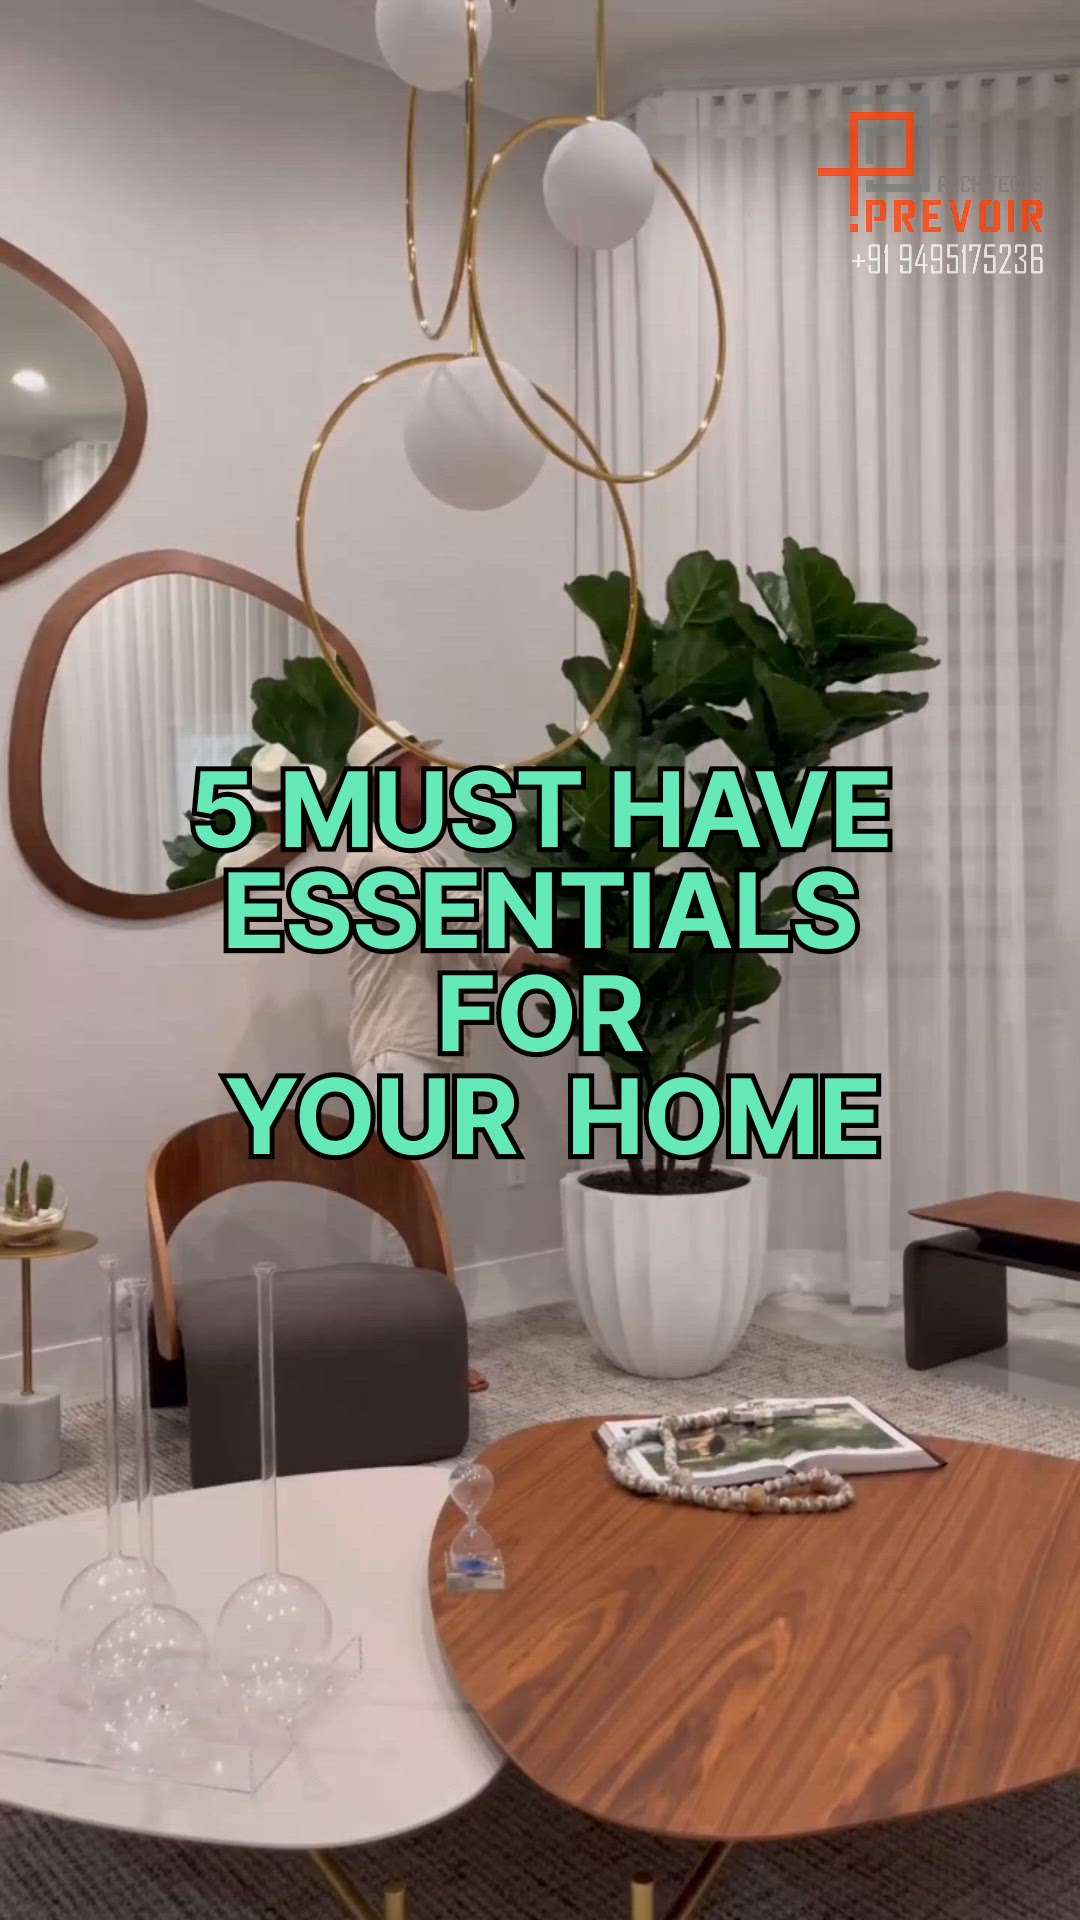 5 MUST HAVE ESSENTIALS FOR YOUR HOME 
#creatorsofkolo #musthave #home #kitchenideas #modernhome #ideas #essentials #musthaves #indoorplants  #mirrors #fabrics #furnitures #lighting